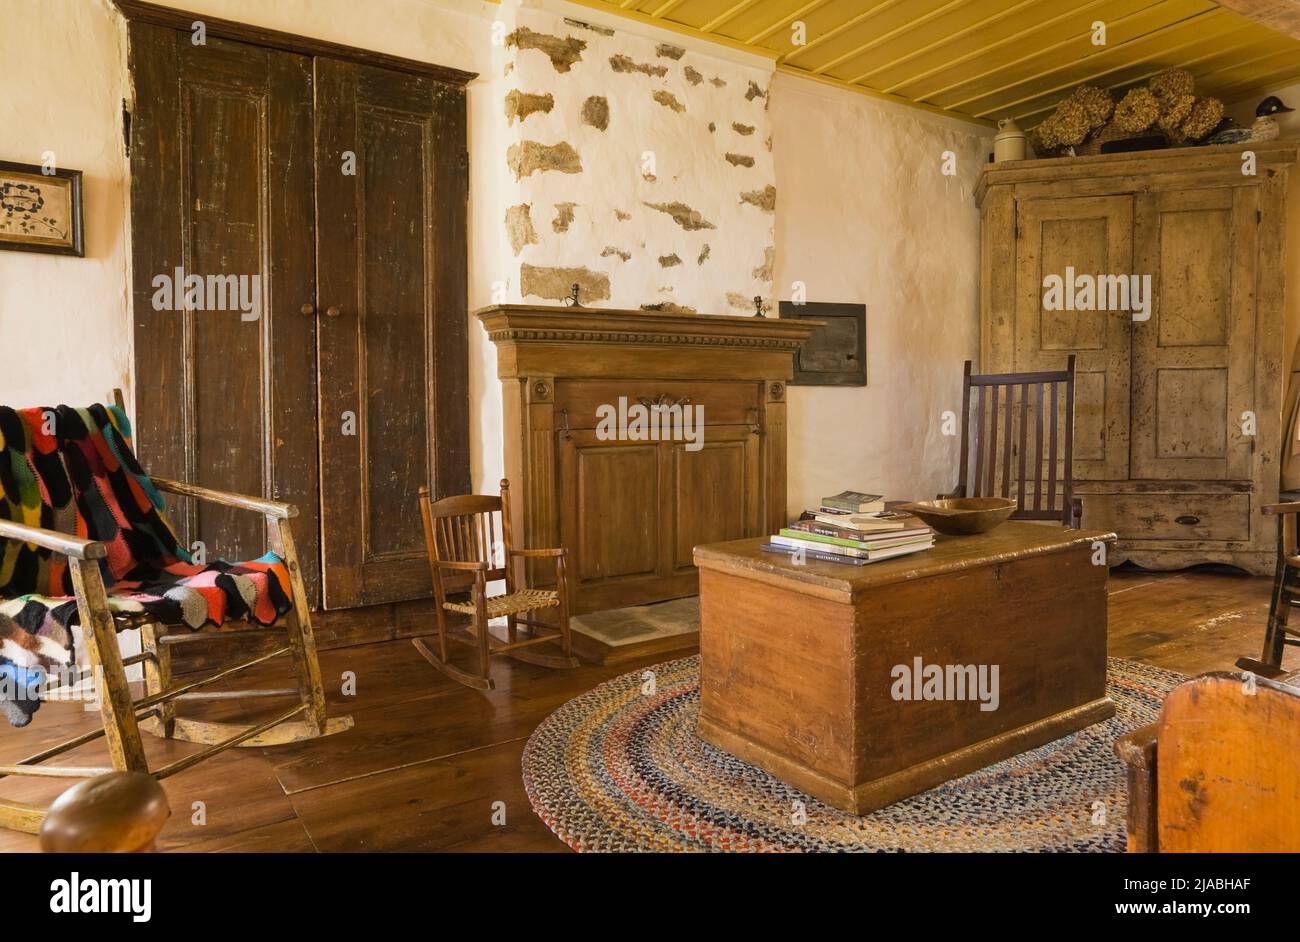 Antique chests, rocking chairs, armoire and furnishings in living room inside old circa 1840 Canadiana cottage style fieldstone home. Stock Photo